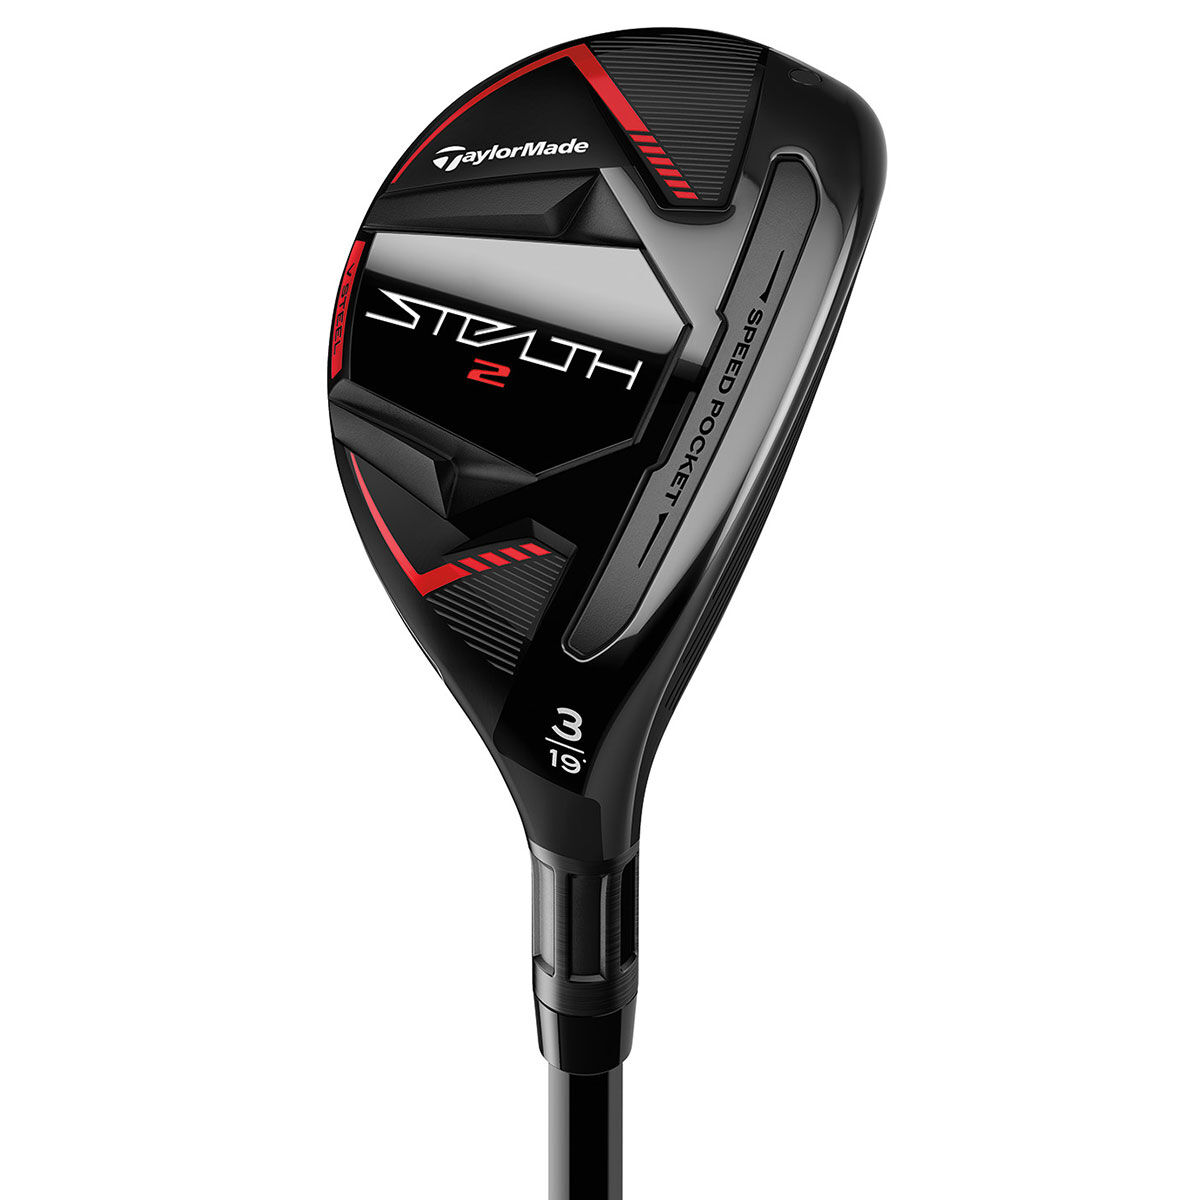 TaylorMade Men’s Black and Red STEALTH 2 Rescue Regular Fuji Ventus Right Hand Golf Hybrid, Size: 19deg | American Golf